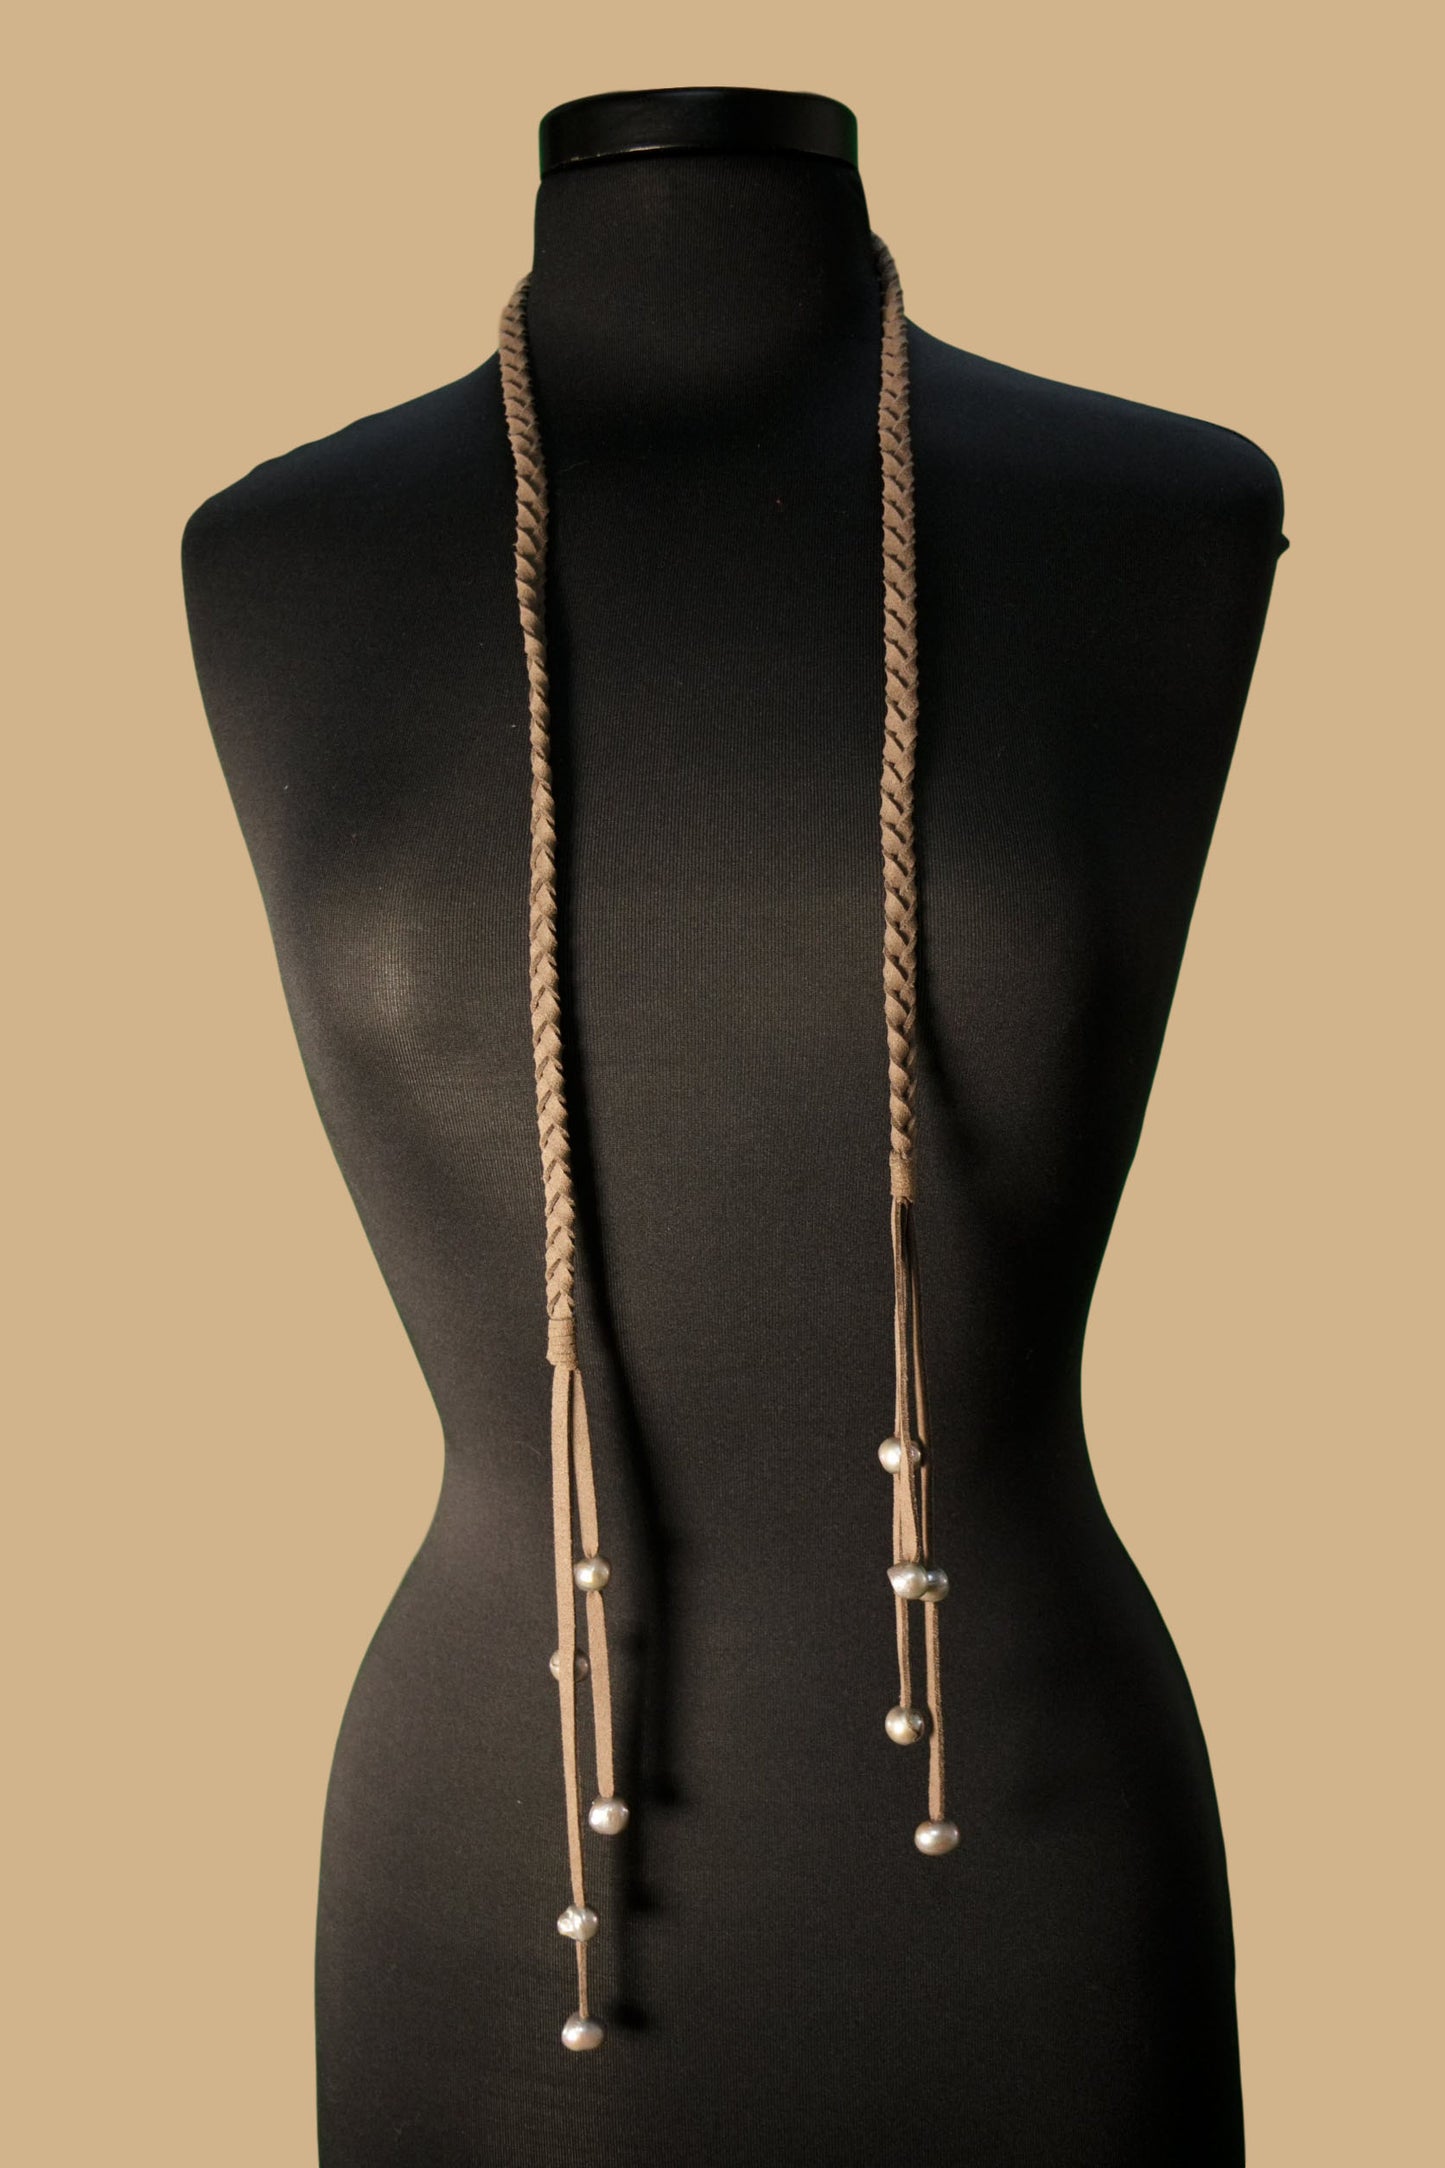 NKL501 Braided Leather Lariet Necklace